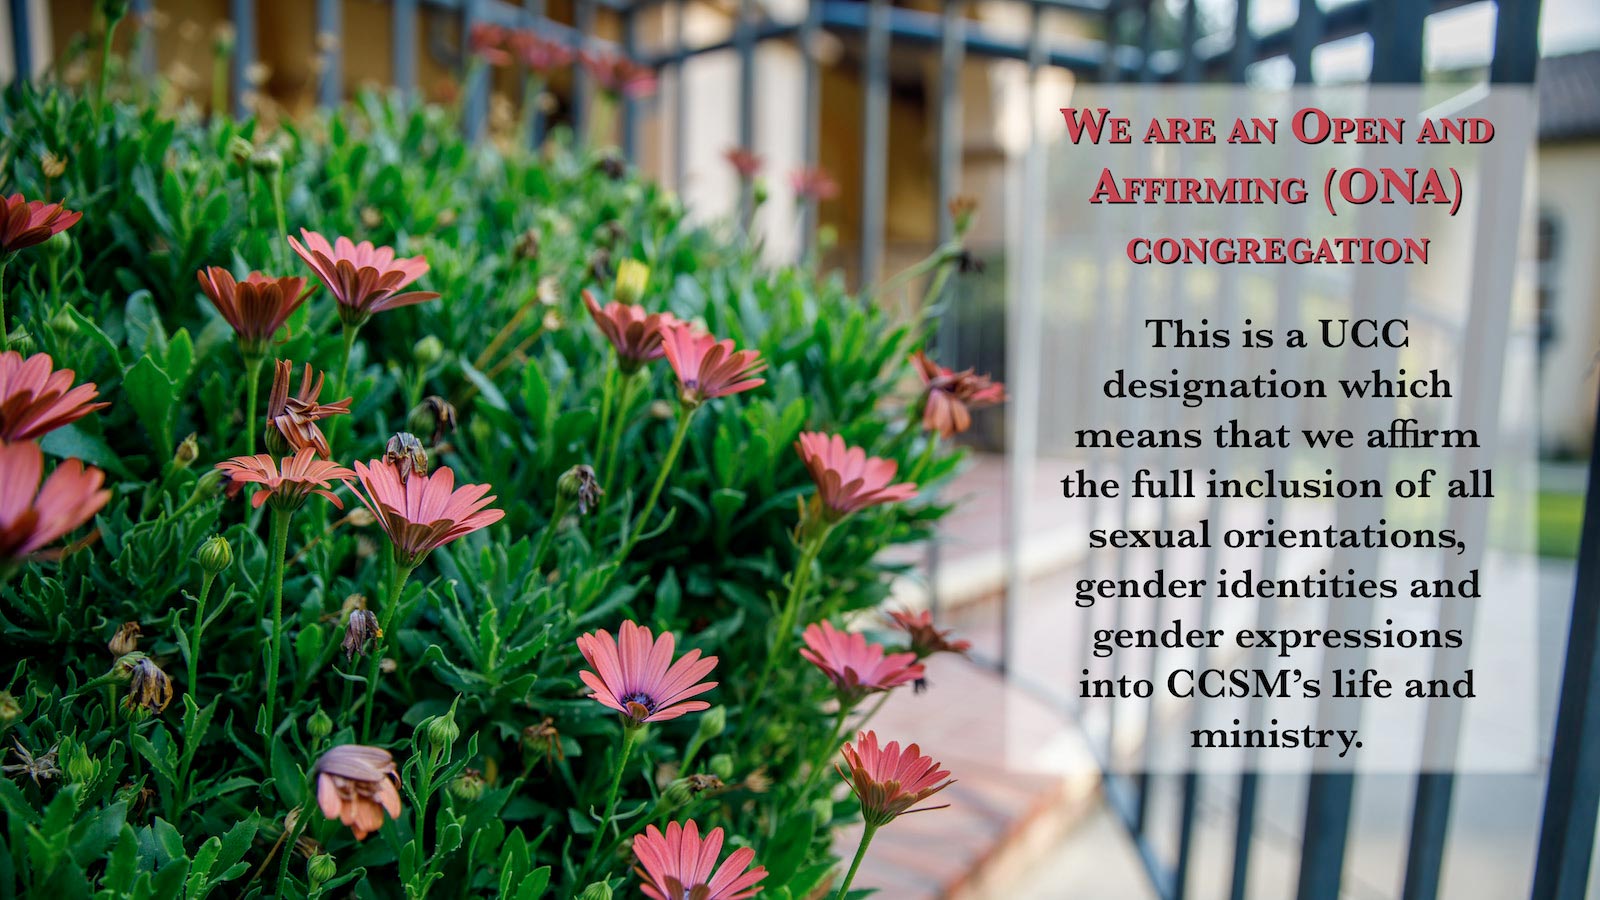 We are an open and affirming (ONA) congregation. This is a UCC designation which means that we affirm the full inclusion of all sexual orientations, gender identities and gender expressions into CCSM's life and ministry.